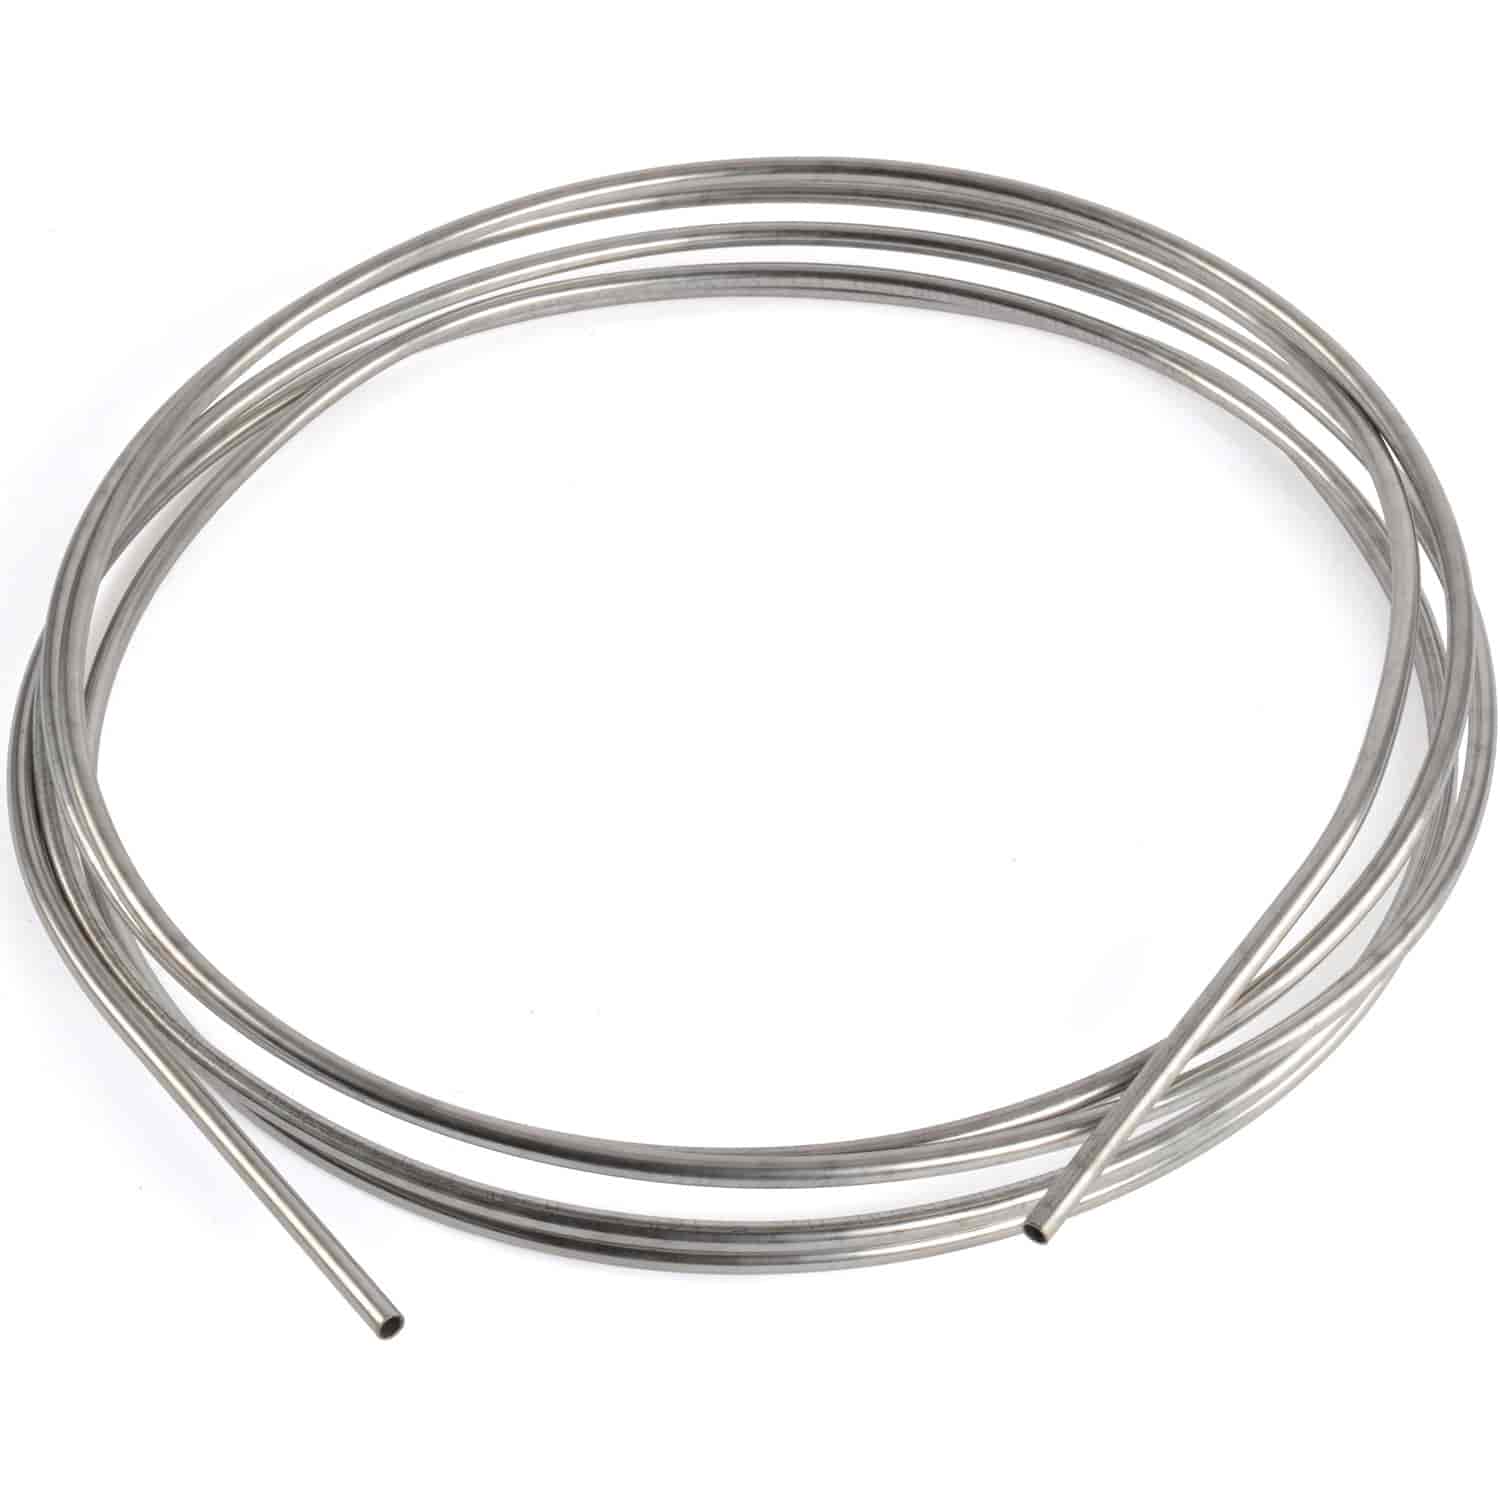 JEGS Stainless Steel Fuel Line Coil, 5/16 in. O.D. x .028 in. Wall Tubing  [20 ft. Coil]